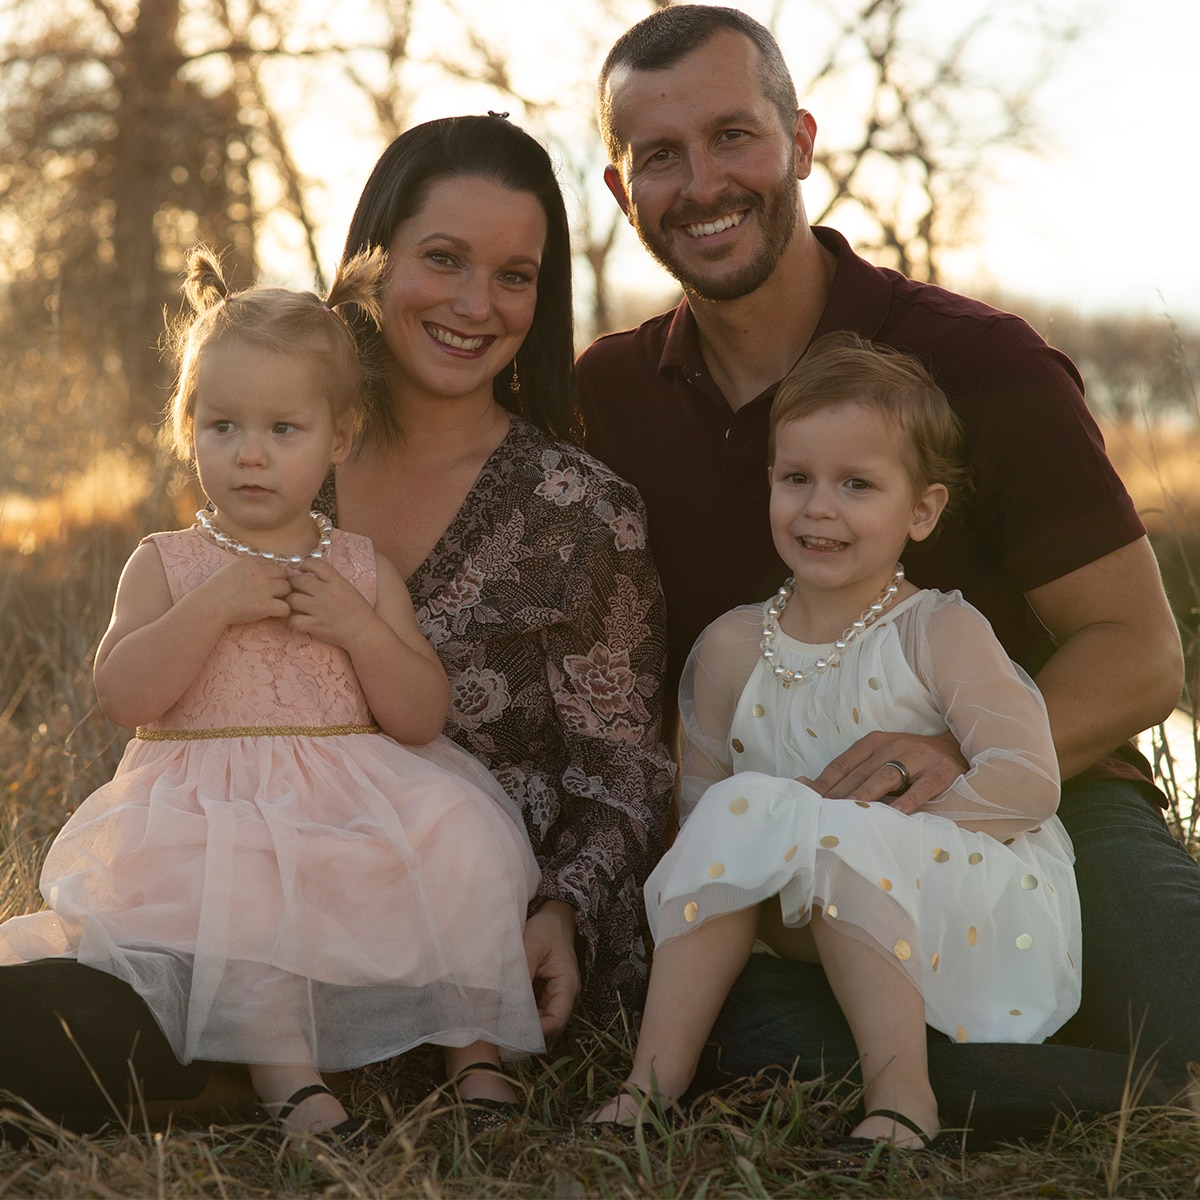 The Unraveling of Chris Watts Before He Murdered His Family